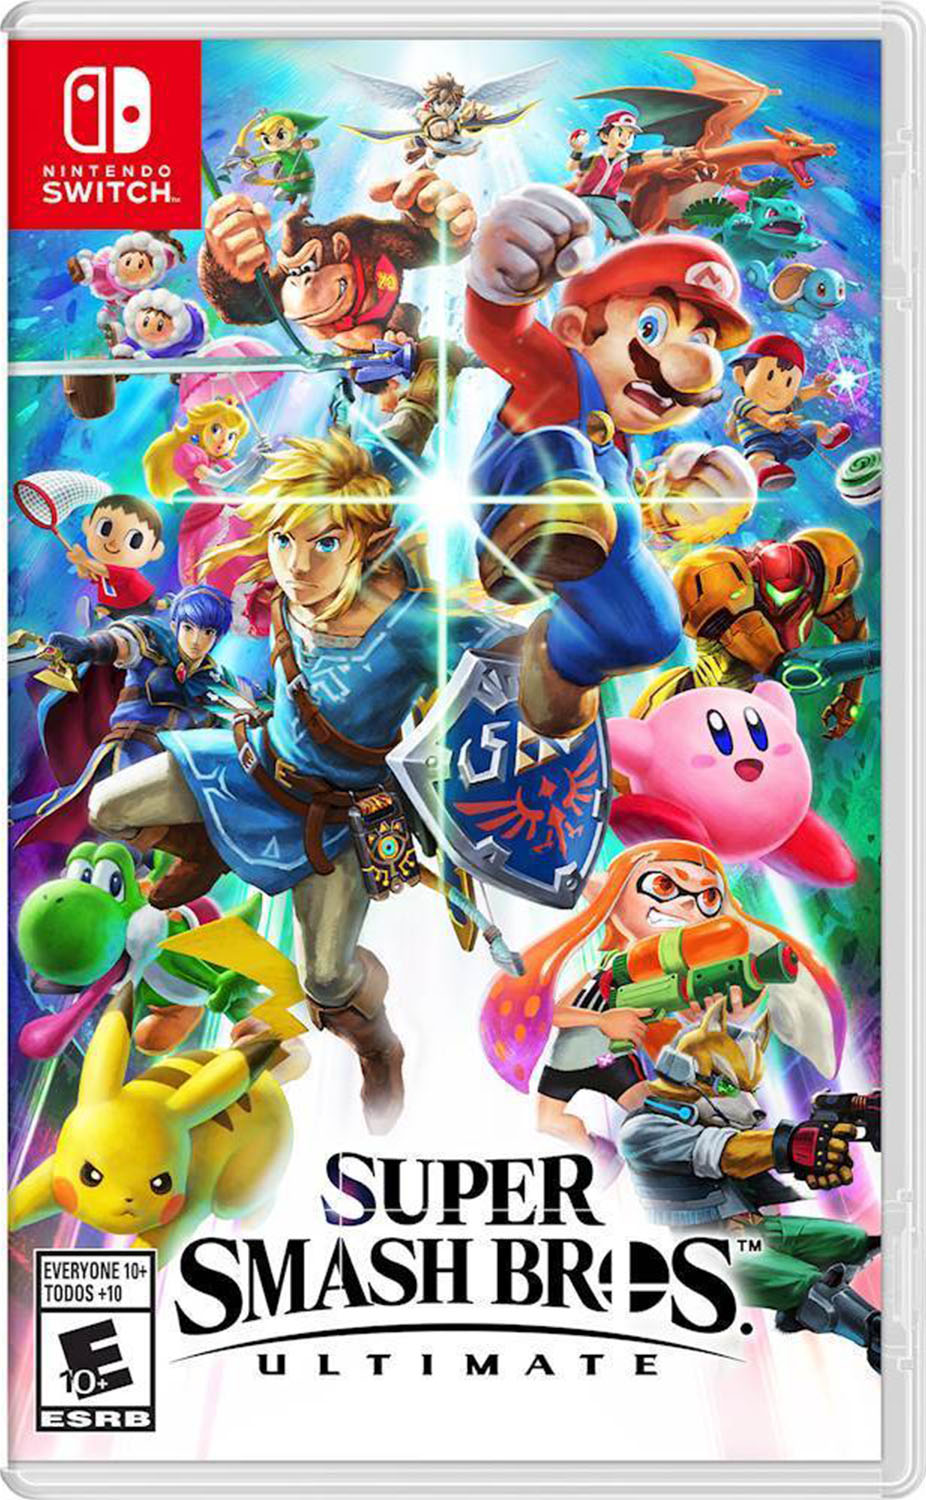 Cover of Super Smash Bros Ultimate with many characters jumping